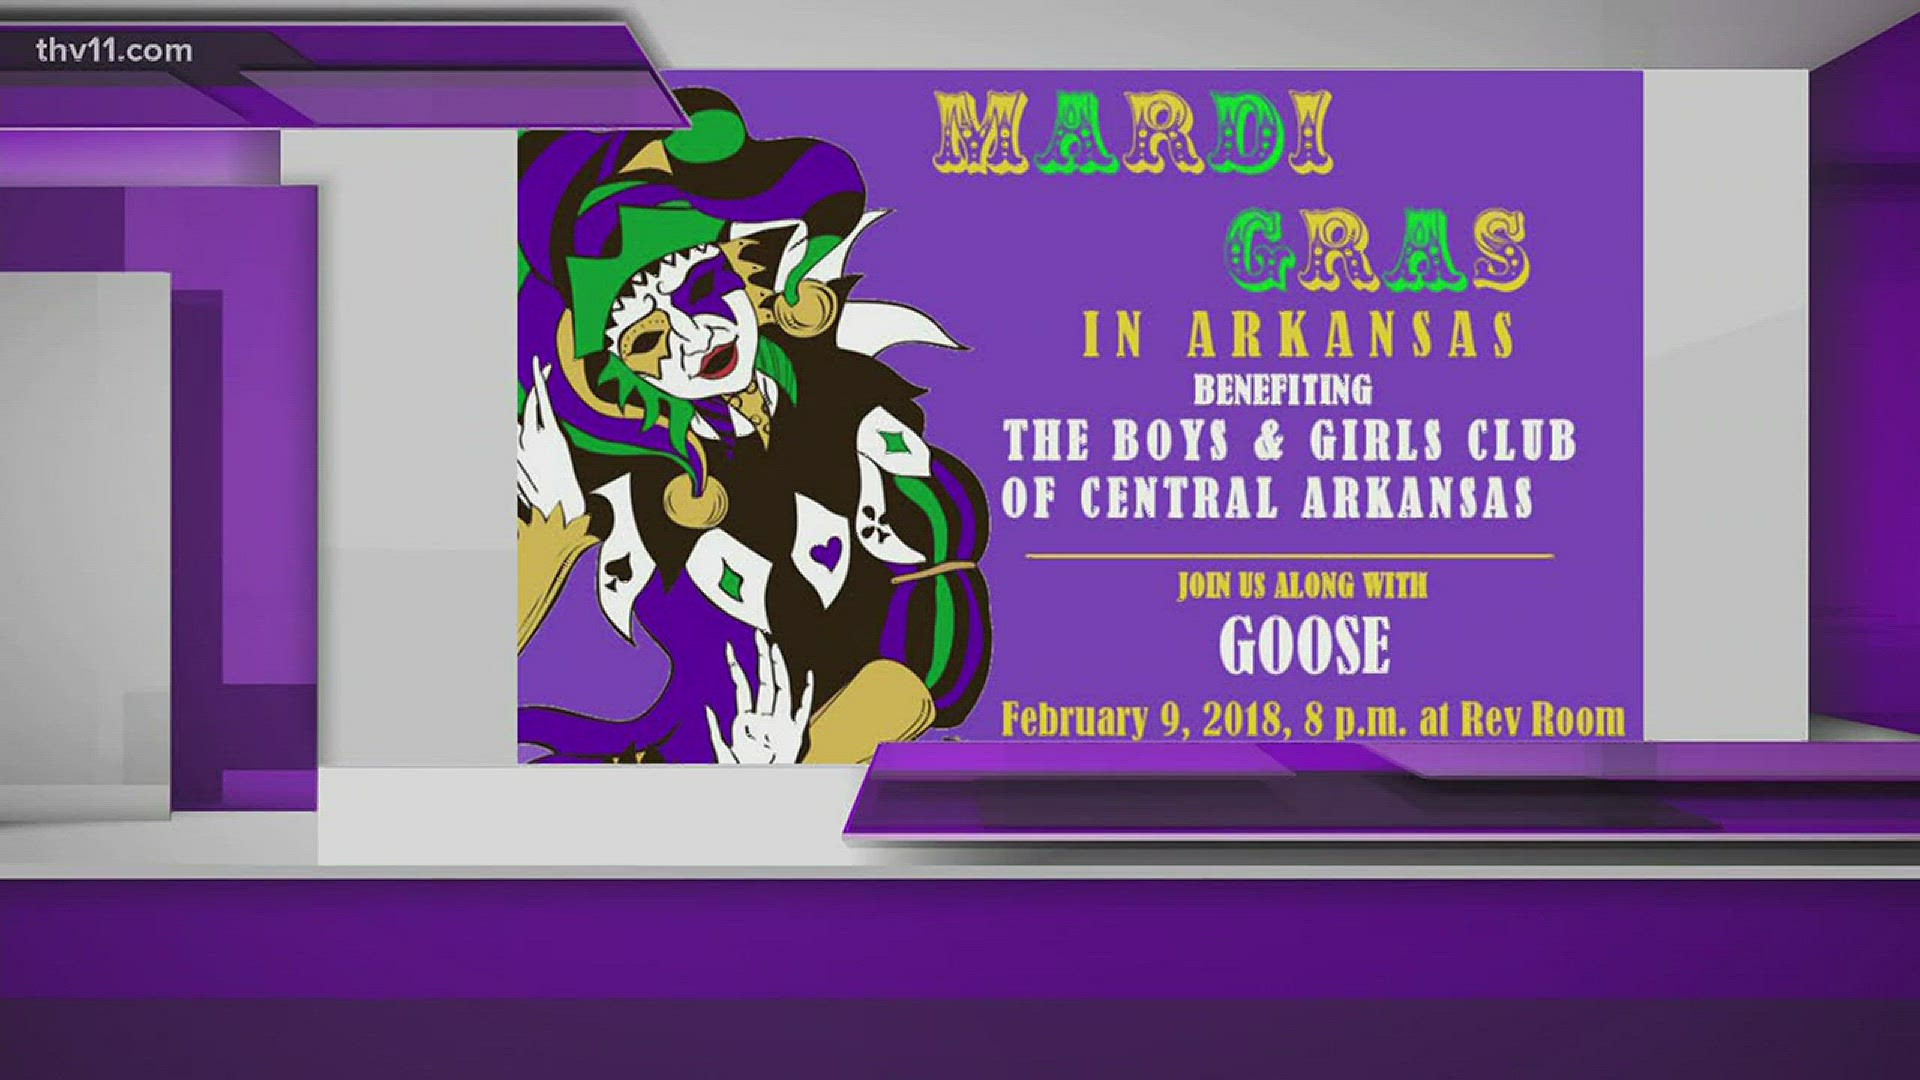 Mardi Gras in Arkansas will raise funds for the Boys & Girls Club of Central Arkansas at 8 p.m. Feb. 9 at the Rev Room.